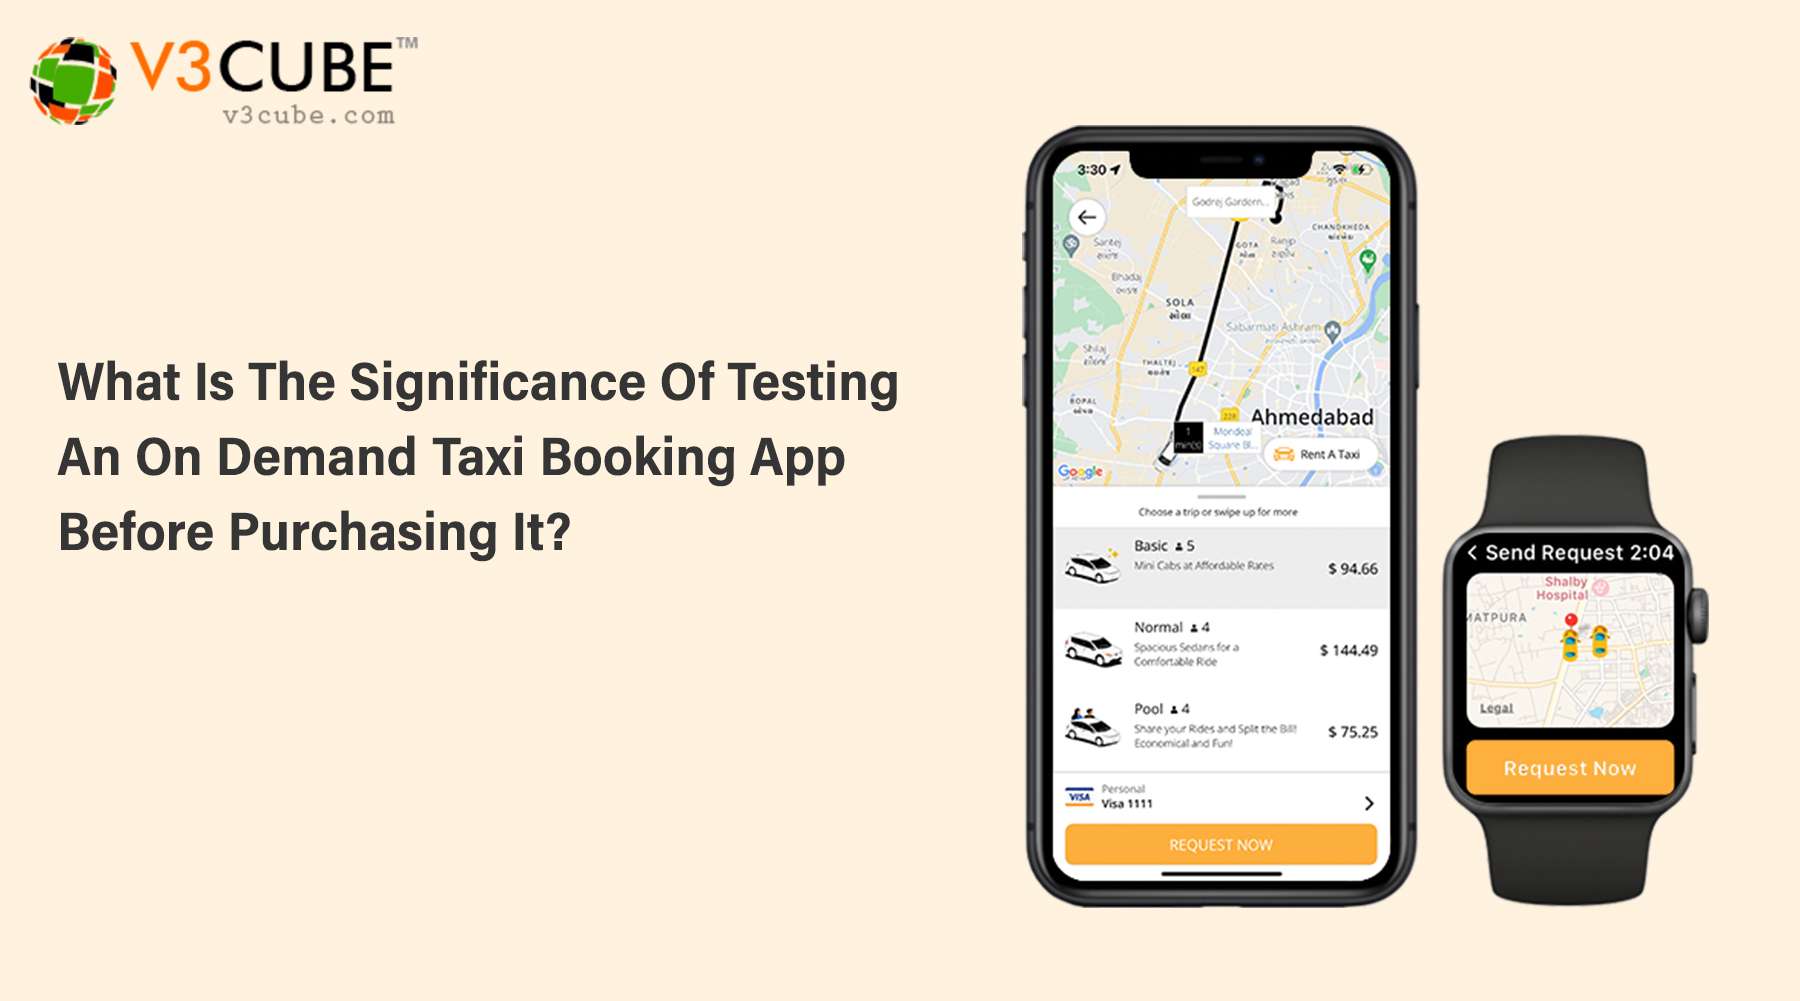 On Demand Taxi Booking App